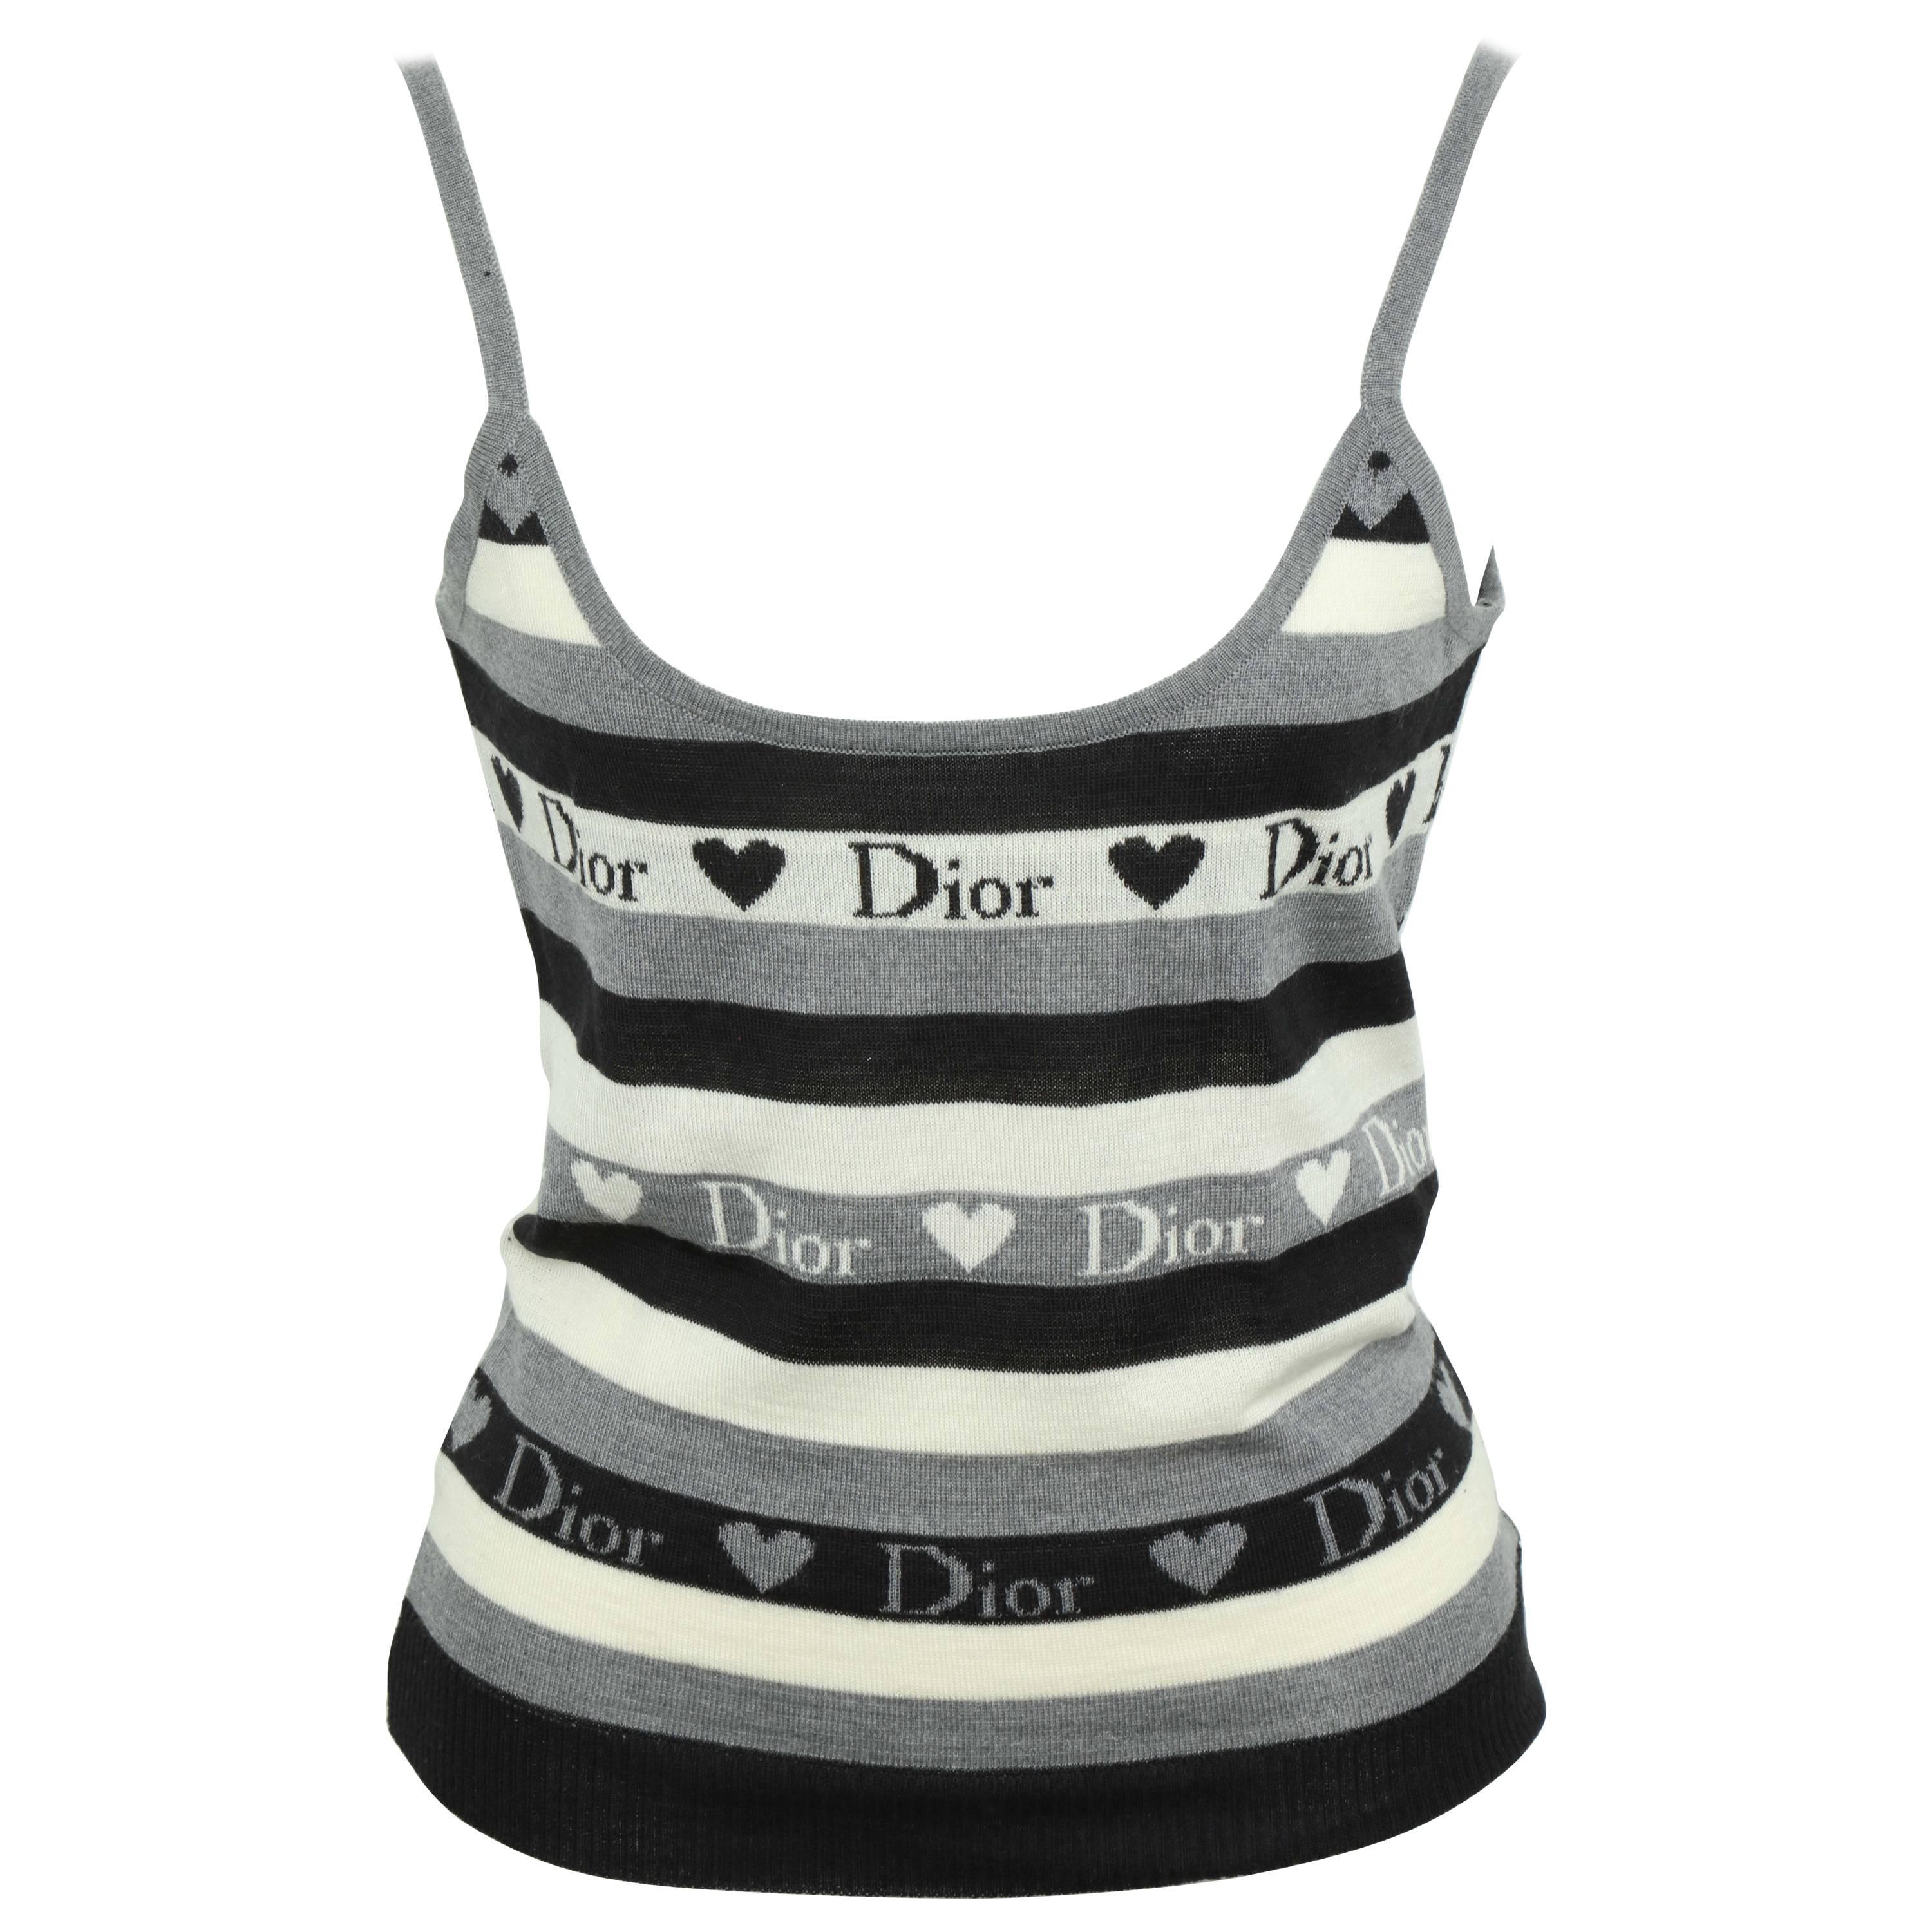 Christian Dior Knit Tank Top Camisole with Heart Motifs